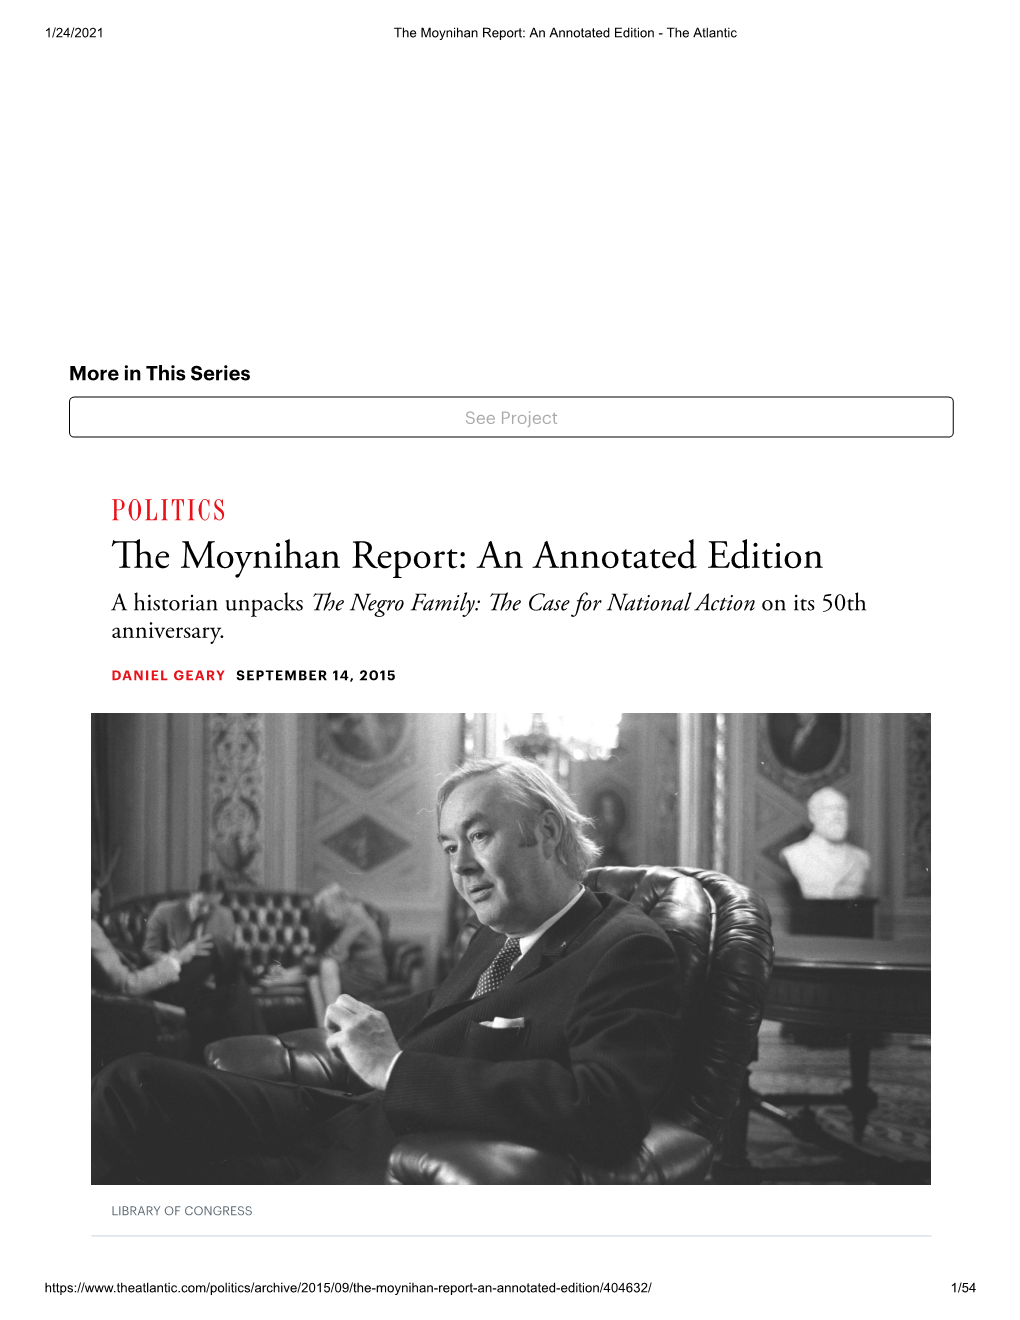 The Moynihan Report Annotated Edition